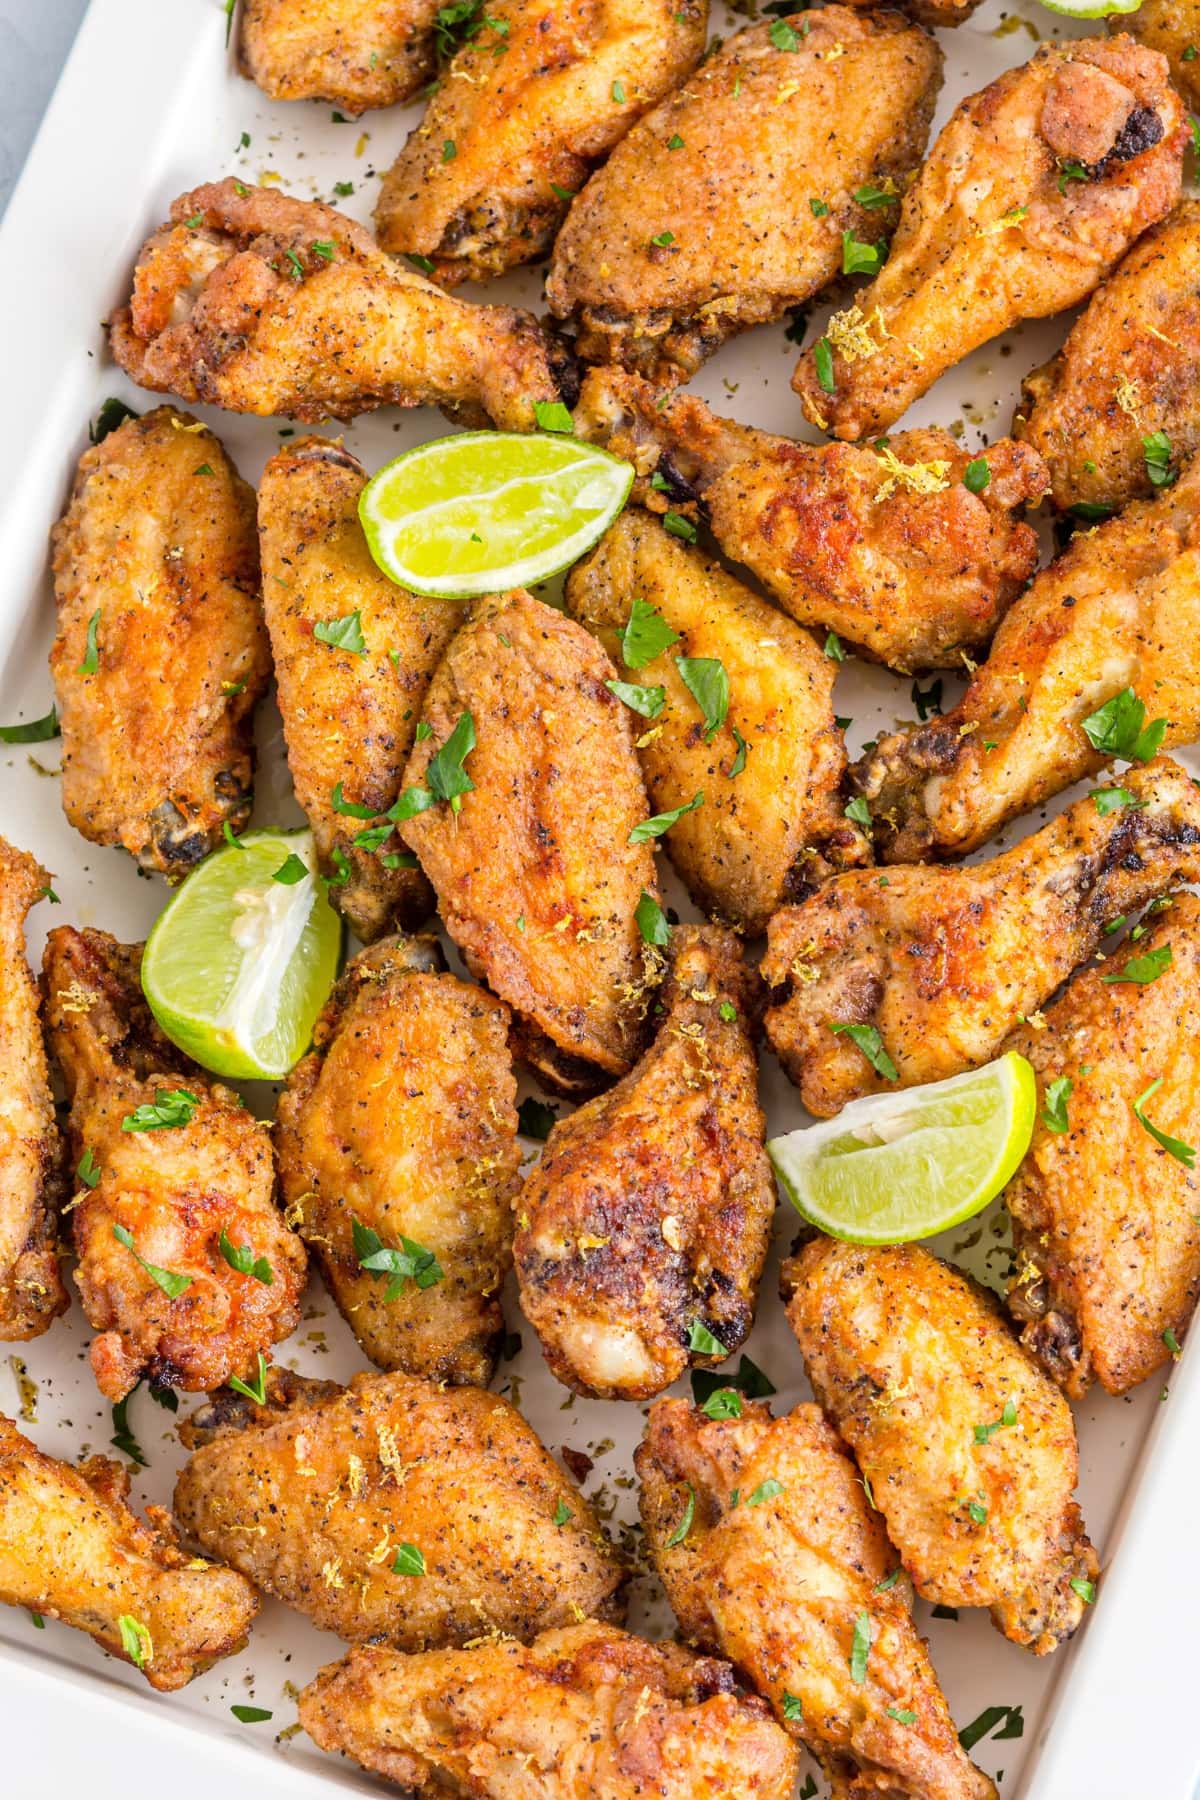 Homemade Lemon Pepper Wings with Herbs on a Baking Dish